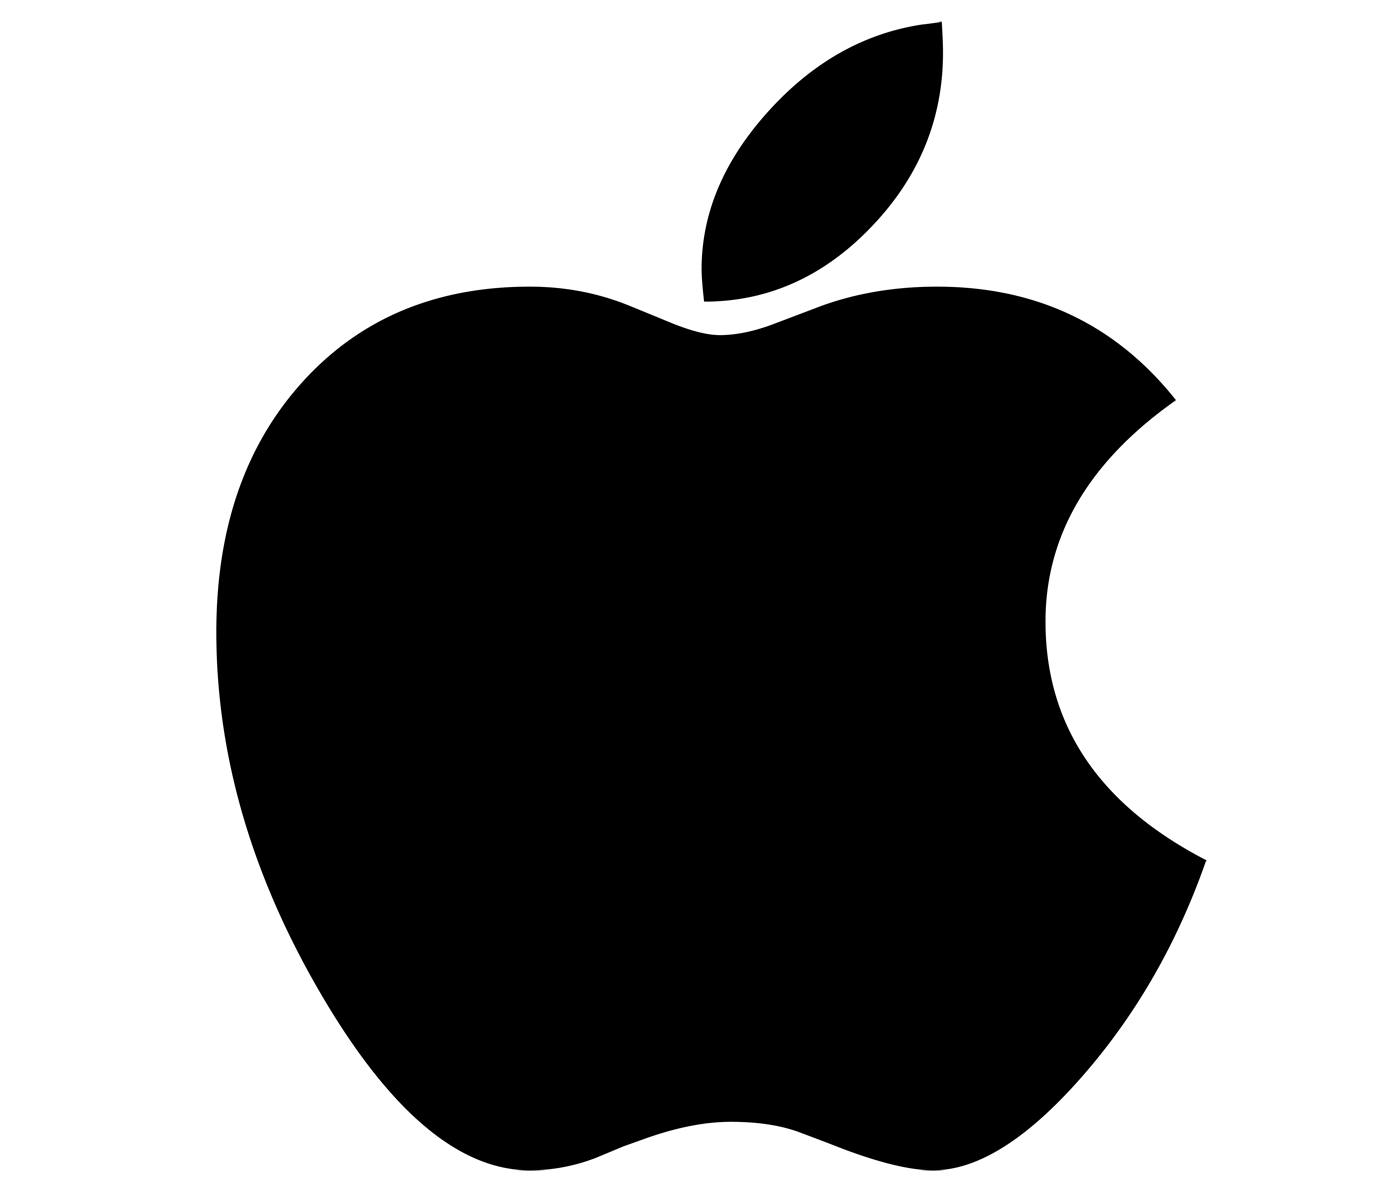 Apple iPhone Logo - iPhone Logo, iPhone Symbol Meaning, History and Evolution